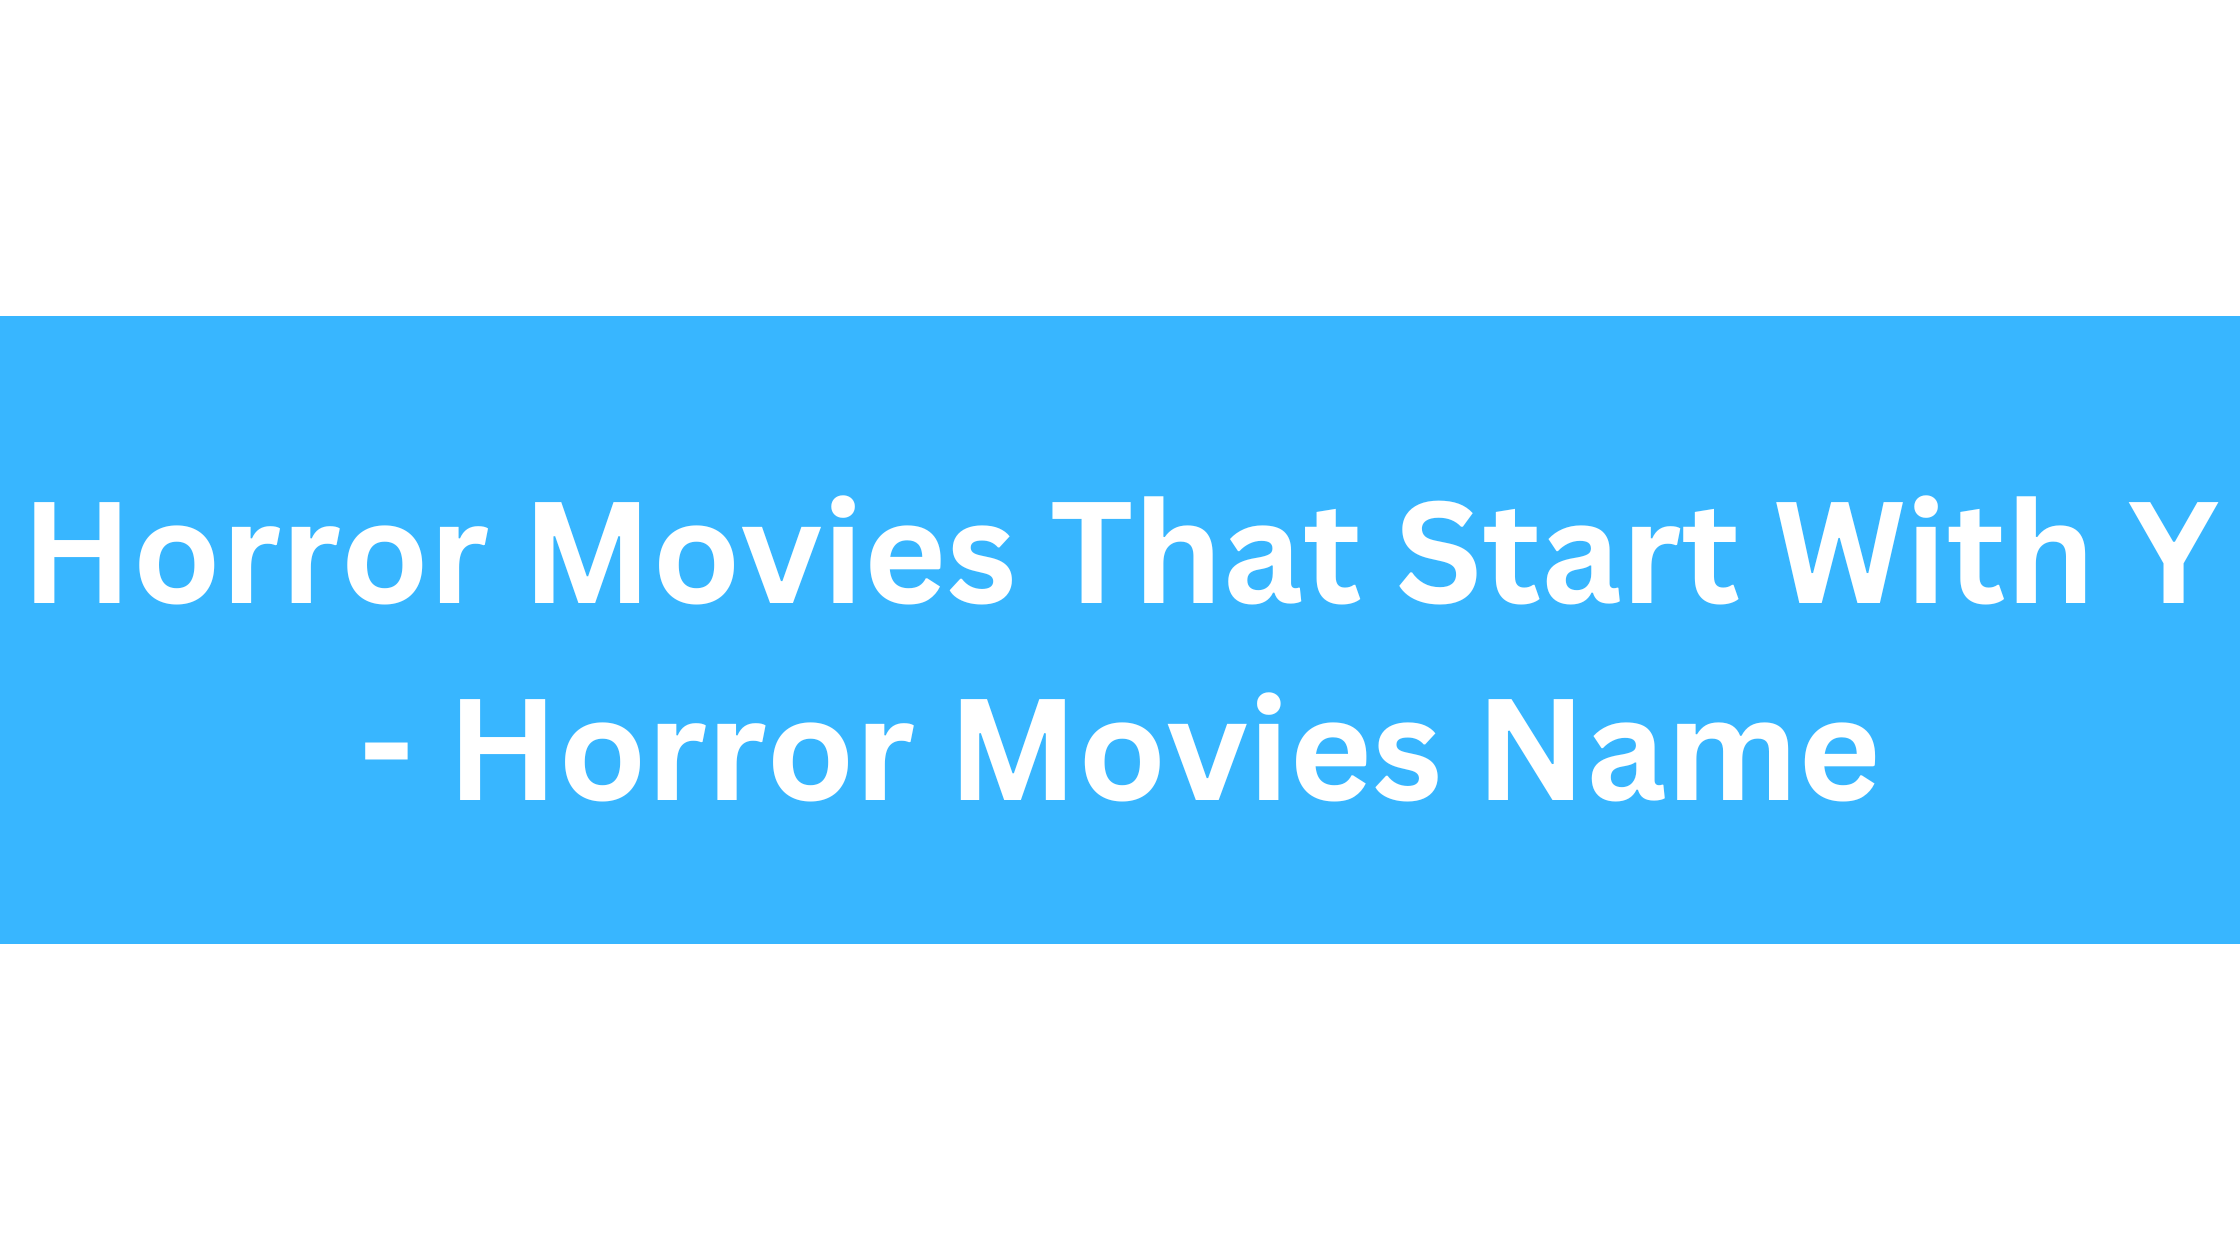 Horror Movies That Start With Y